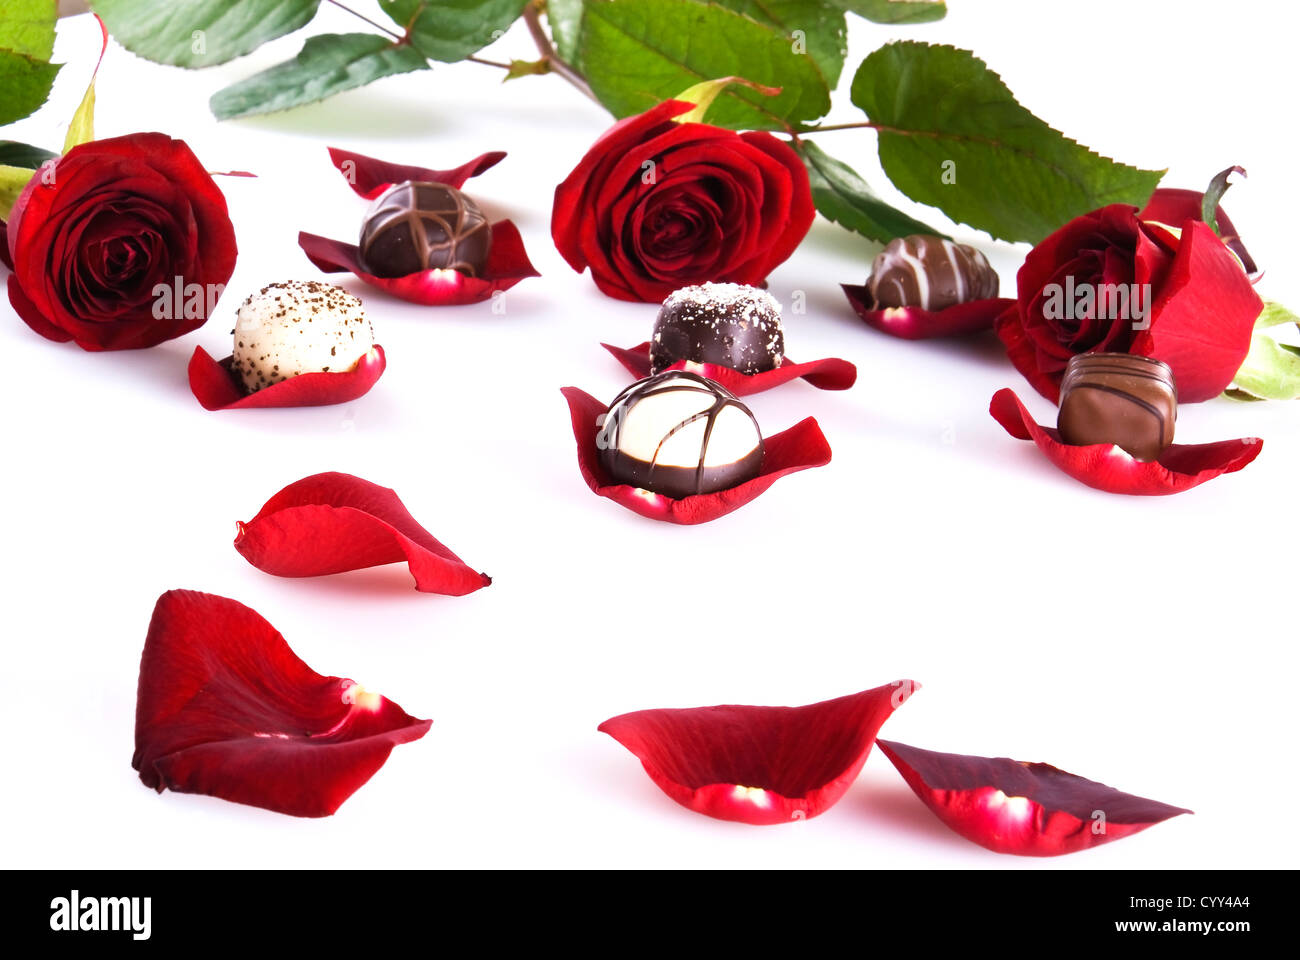 Red roses, petals, lollipops and chocolates creative composition layout.  Photograph by Milleflore Images - Pixels